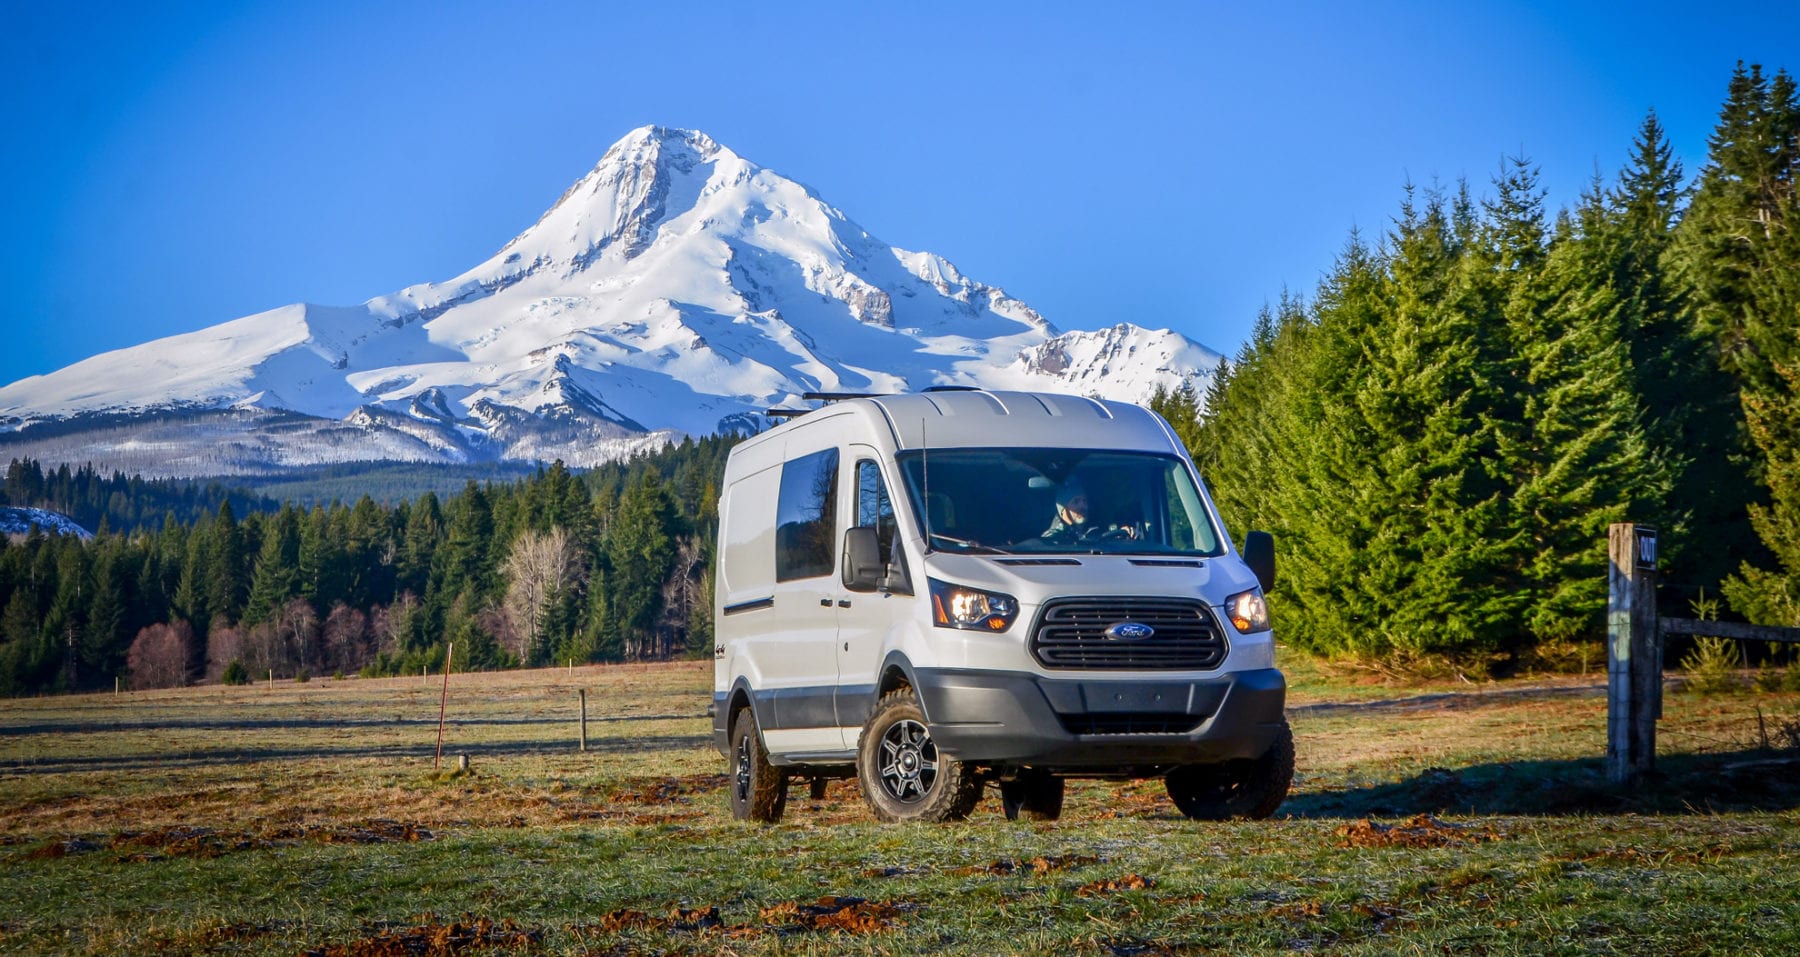 Exterior shot of front side of Ford Transit Campervan with Mt. Hood in background built by Axis Vehicle Outfitters in Portland, Oregon